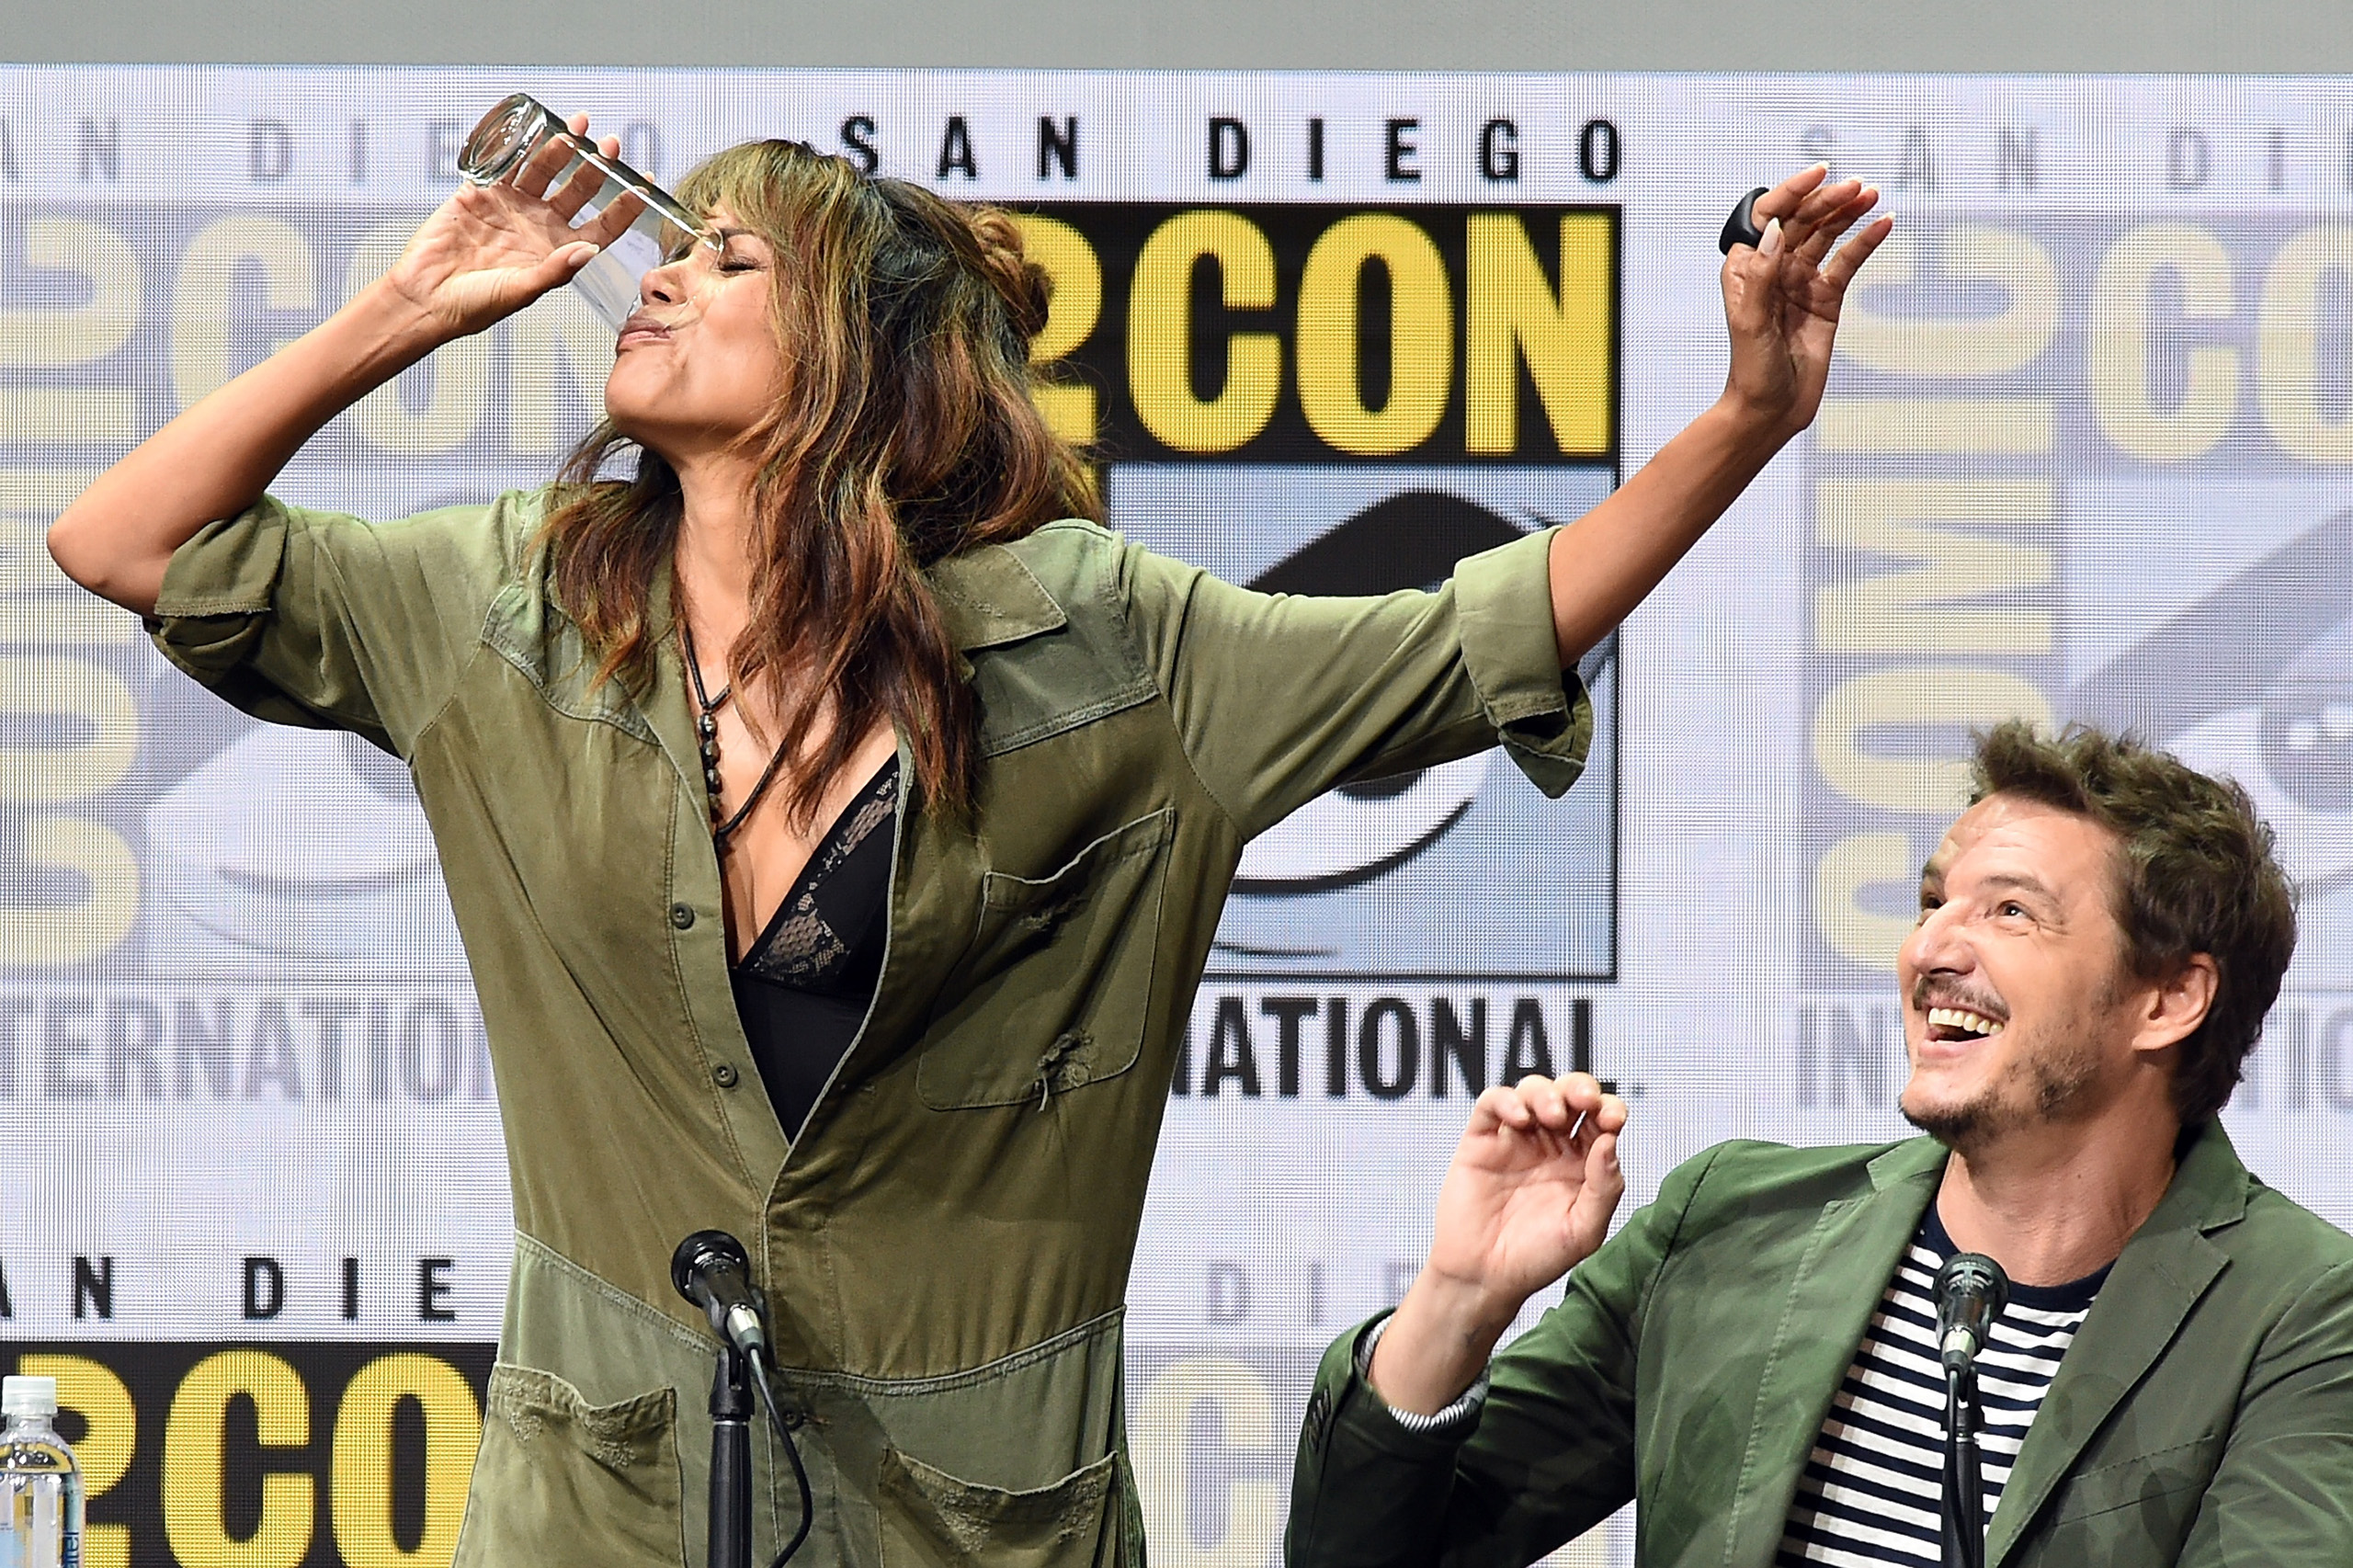 Actor Halle Berry takes a drink onstage while actor Pedro Pascal looks on at the 20th Century FOX panel during Comic-Con International 2017 at San Diego Convention Center on July 20, 2017. (Kevin Winter—Getty Images)